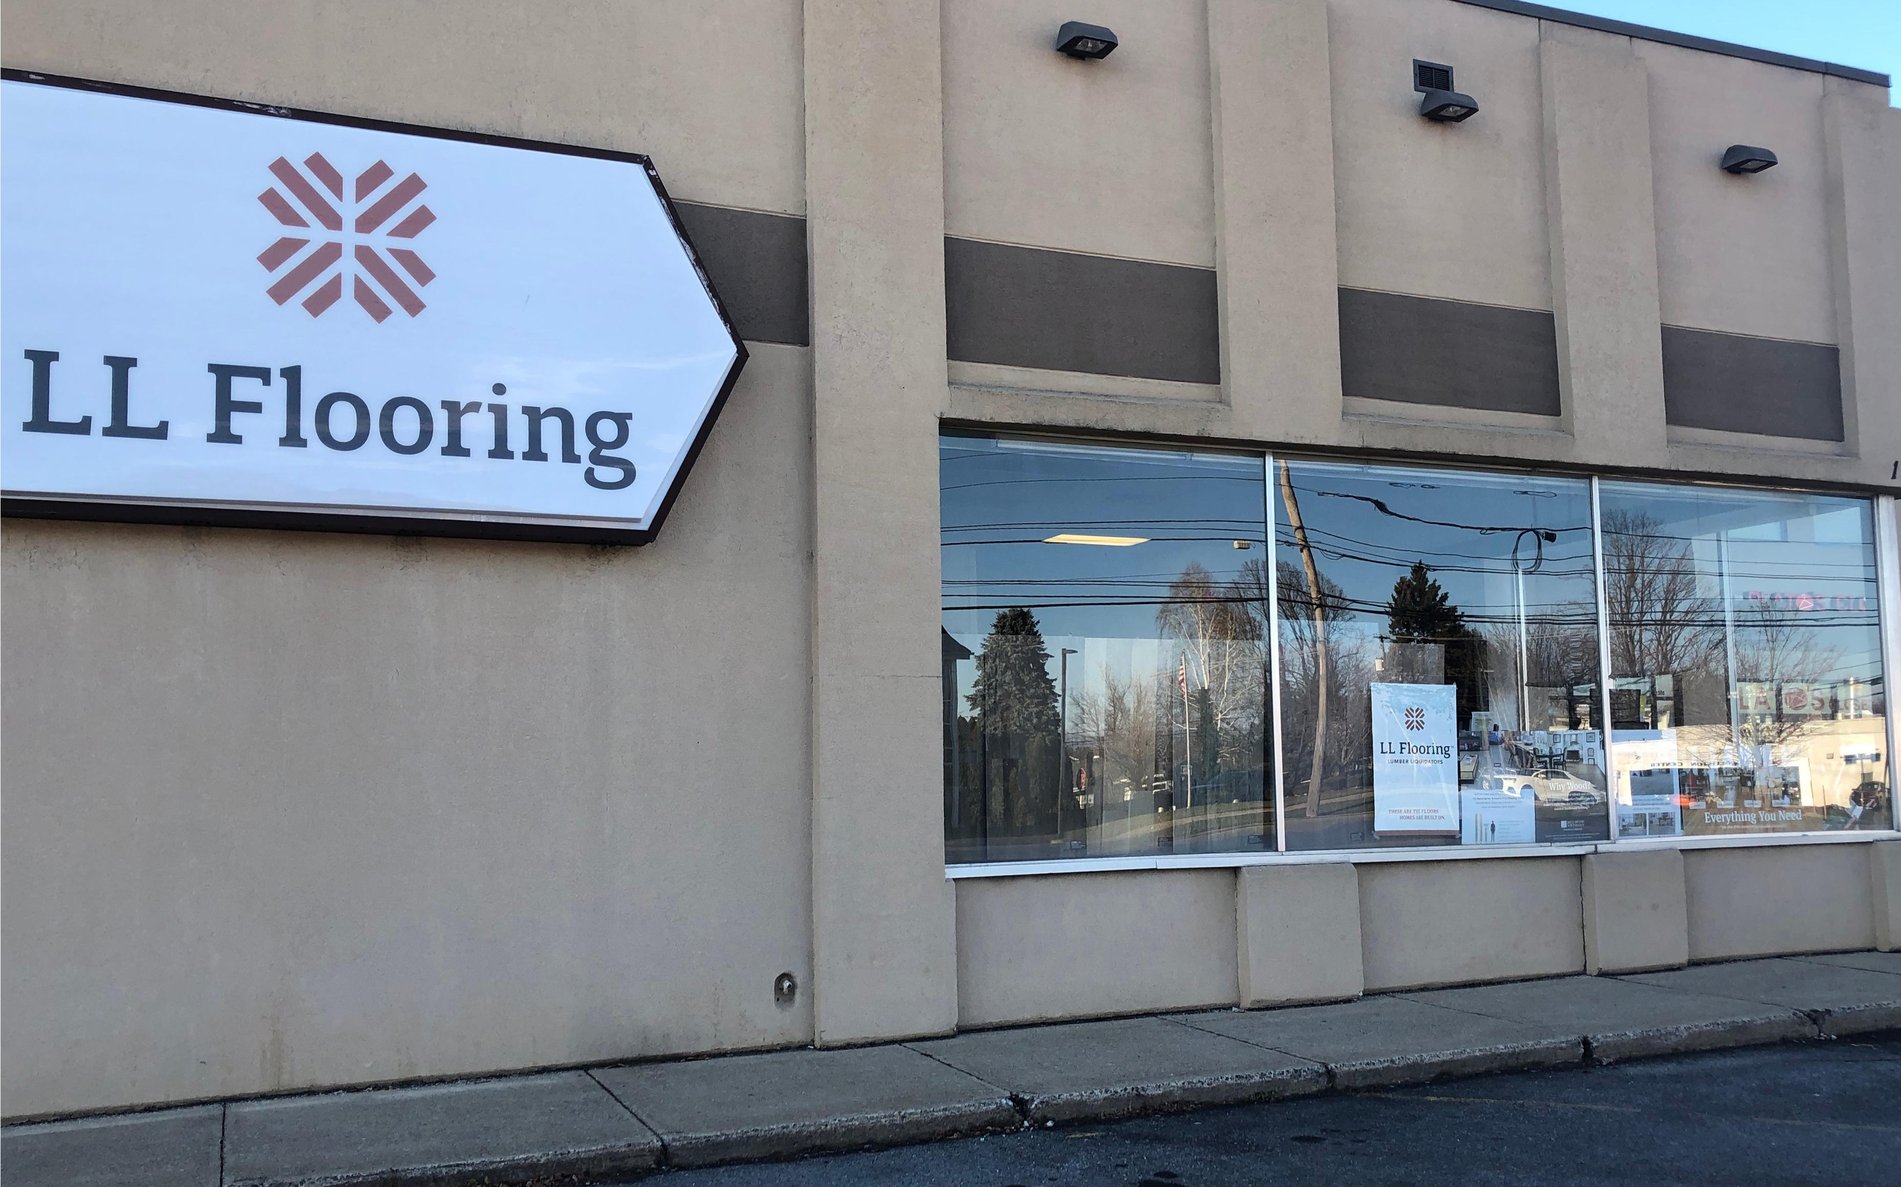 LL Flooring #1269 State College | 1524 North Atherton Street | Storefront